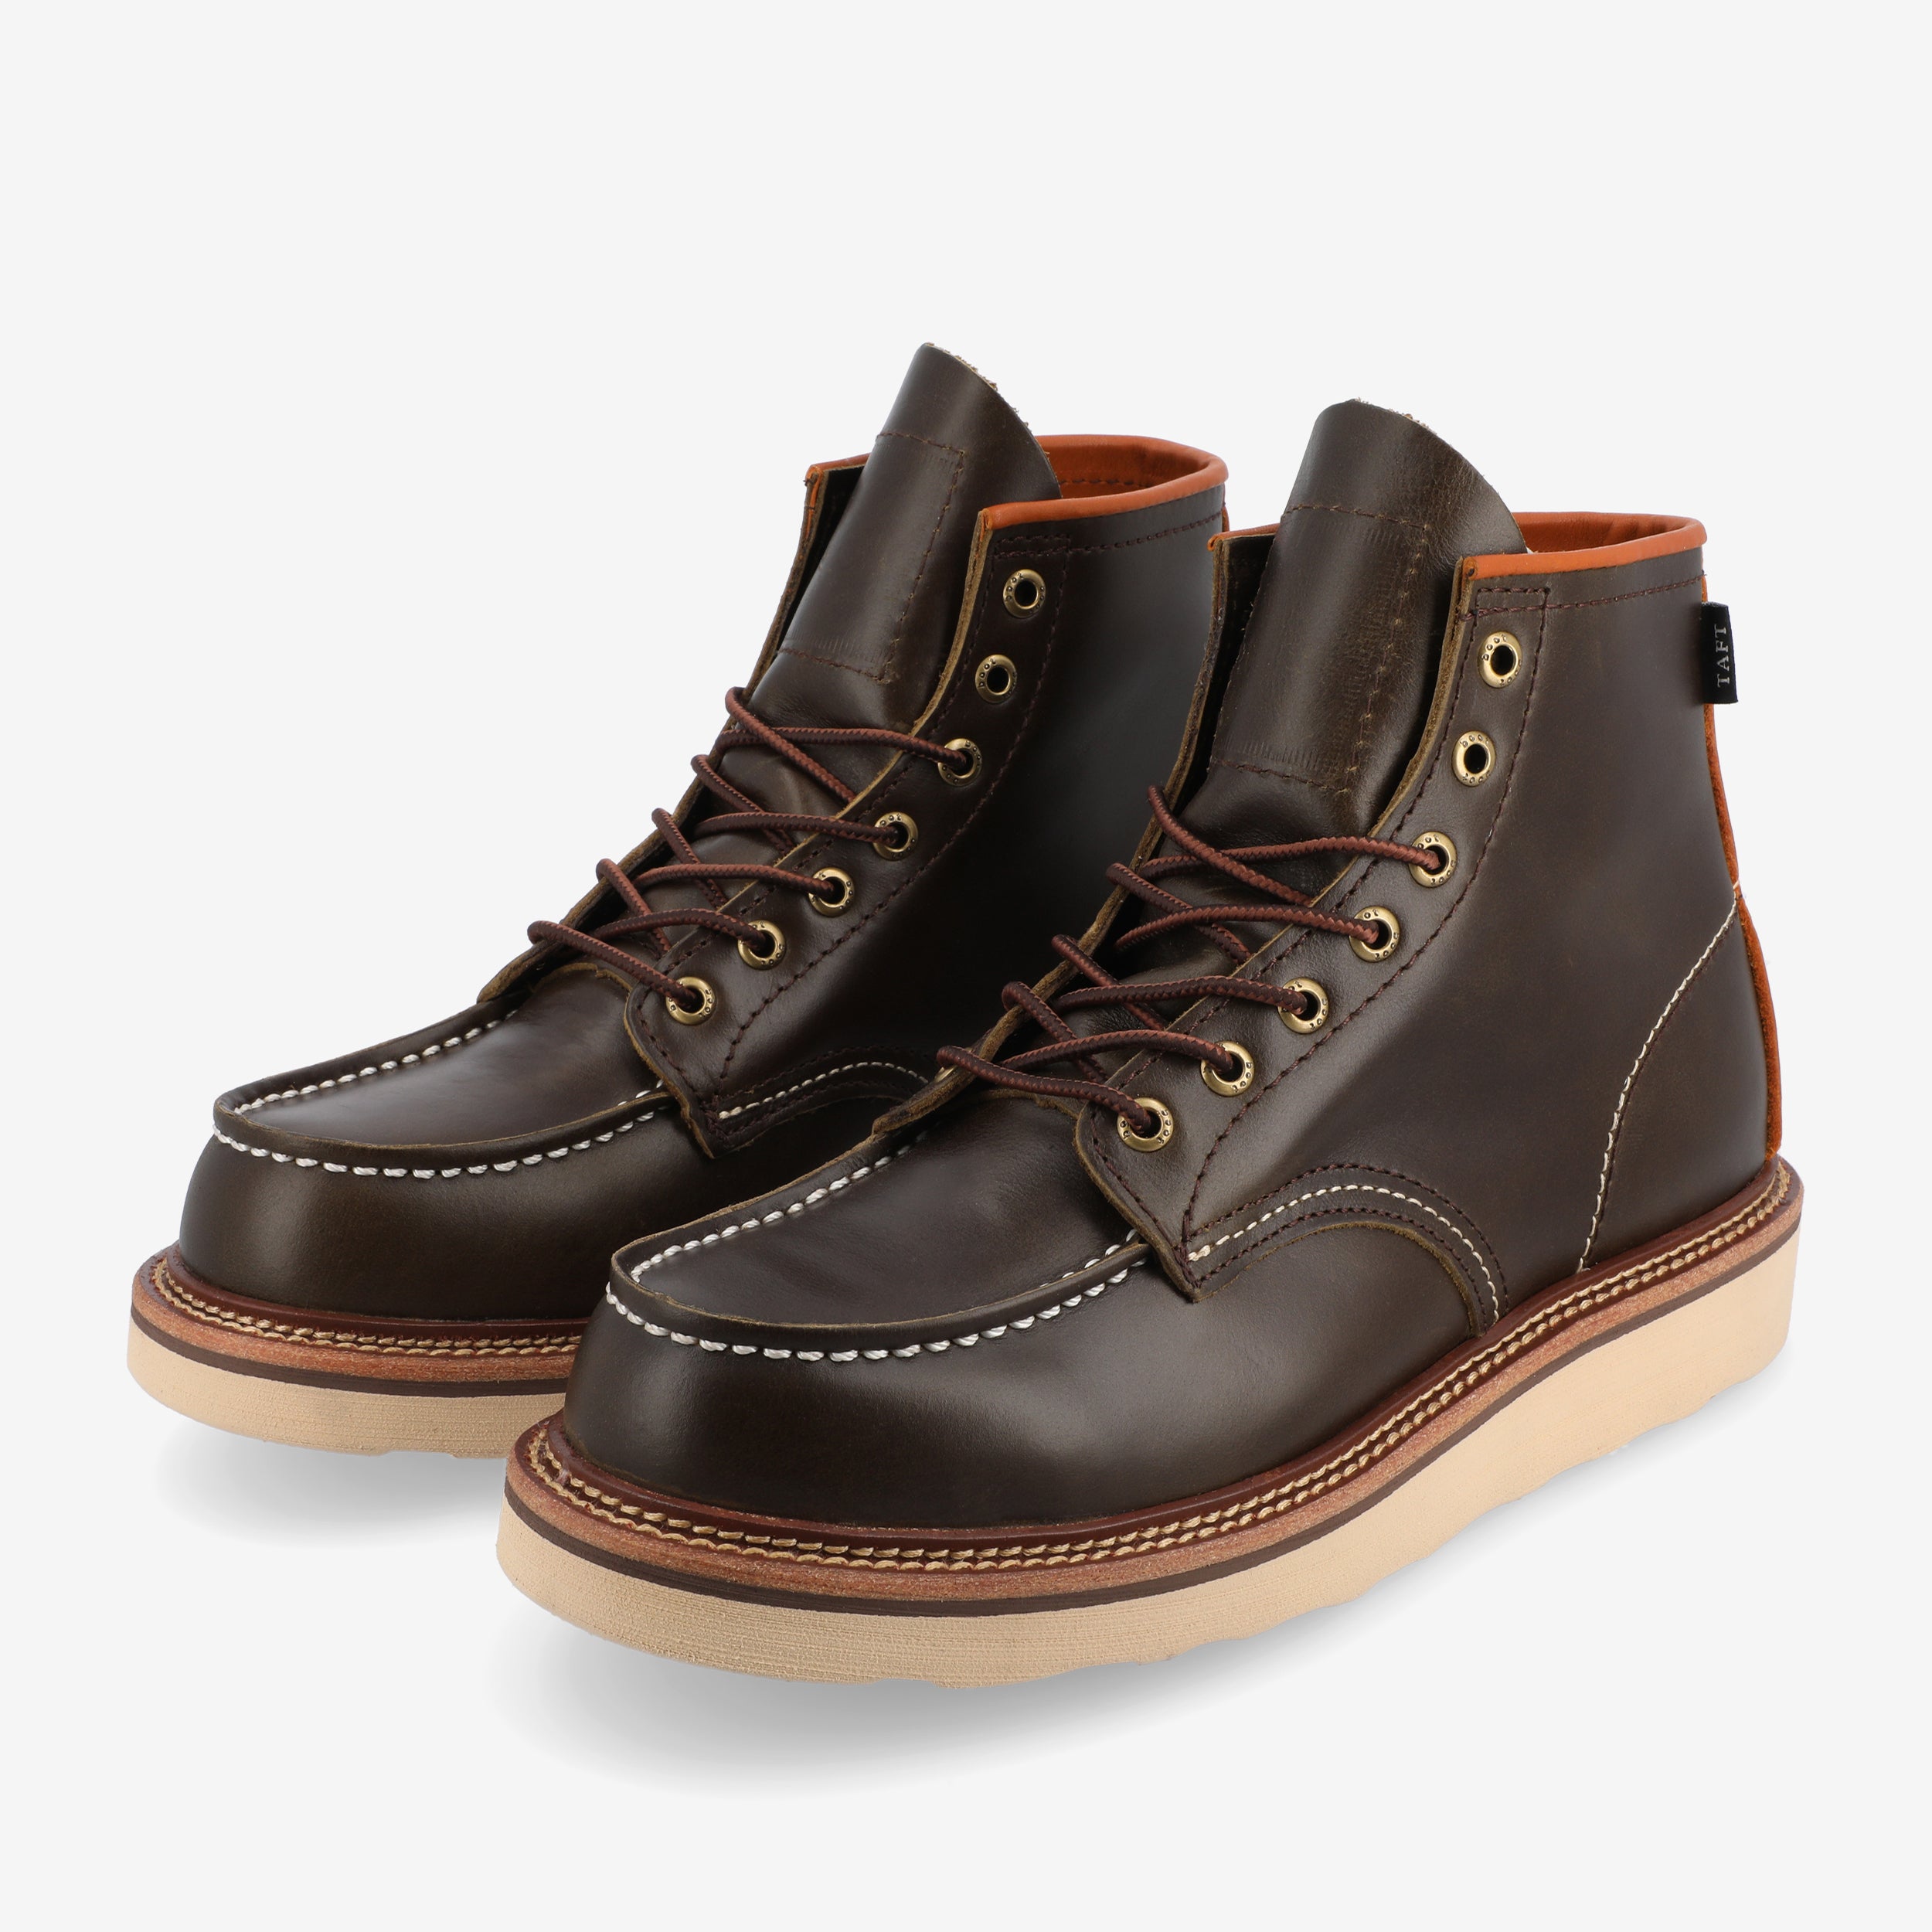 Model 002 Boot In Olive (Final Sale)